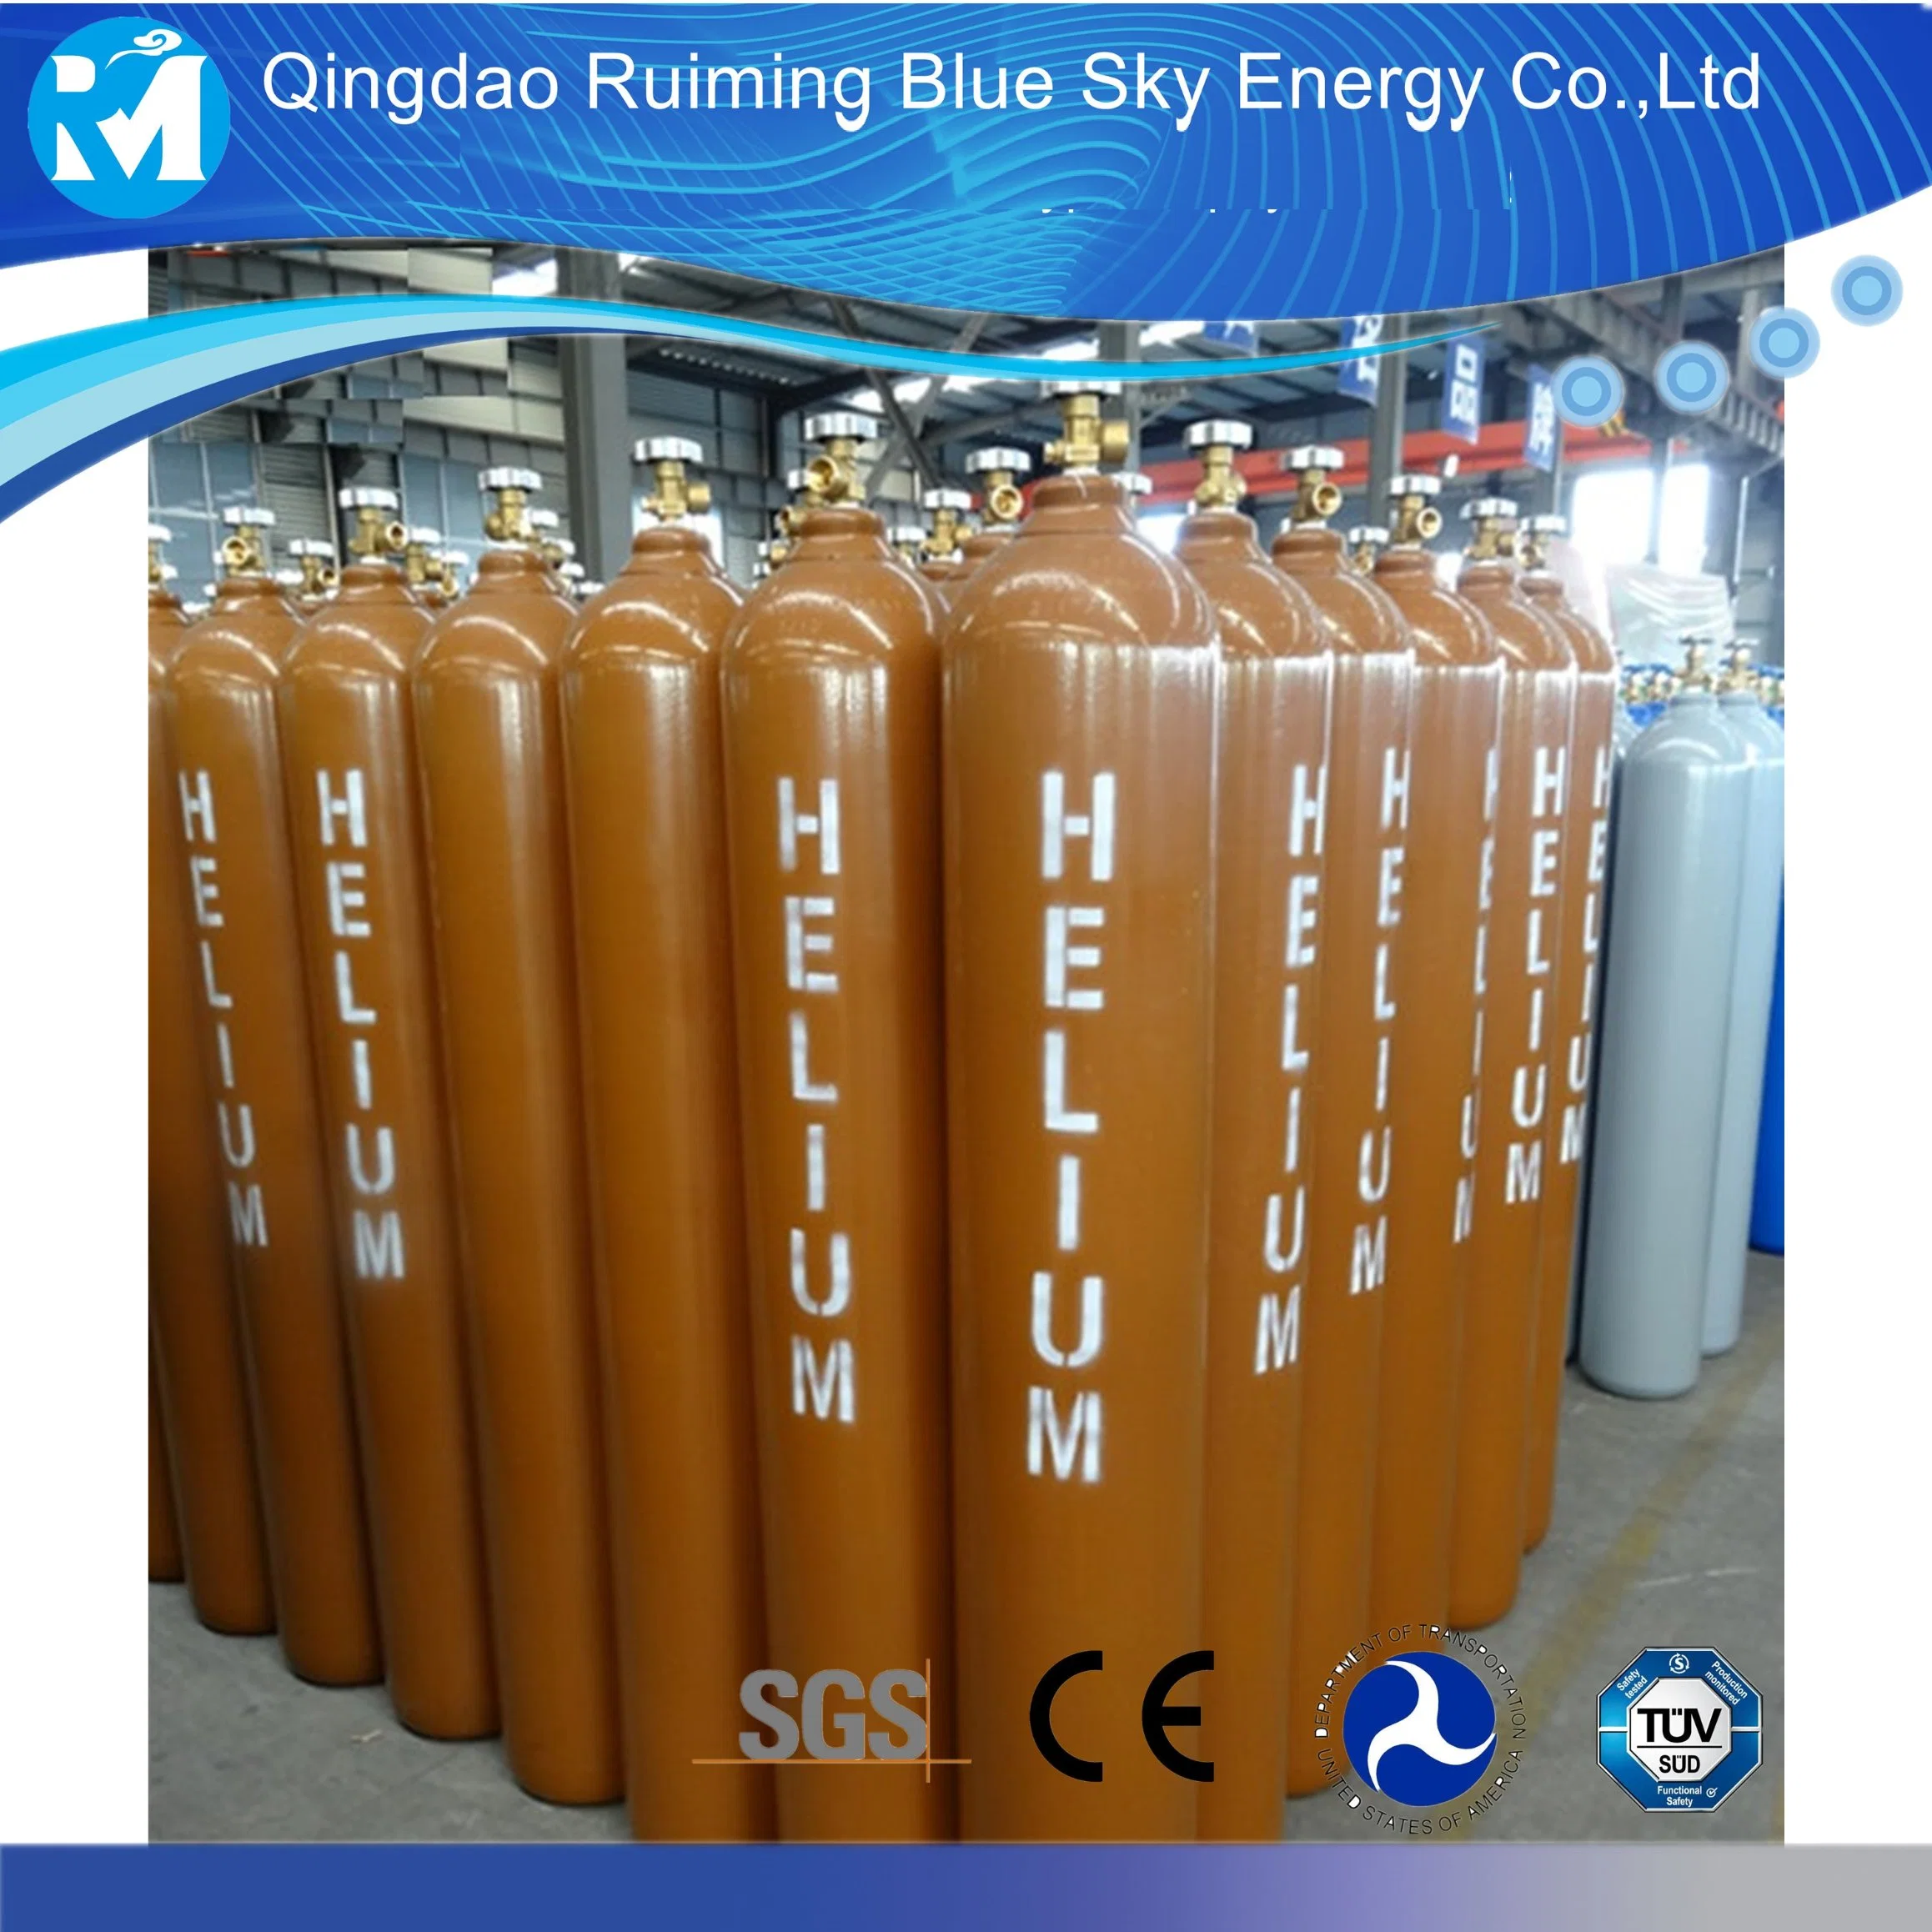 Un 1046 Non-Flammable RM Cylinders 40L-50L Qingdao, China Cylinder Helium Gas